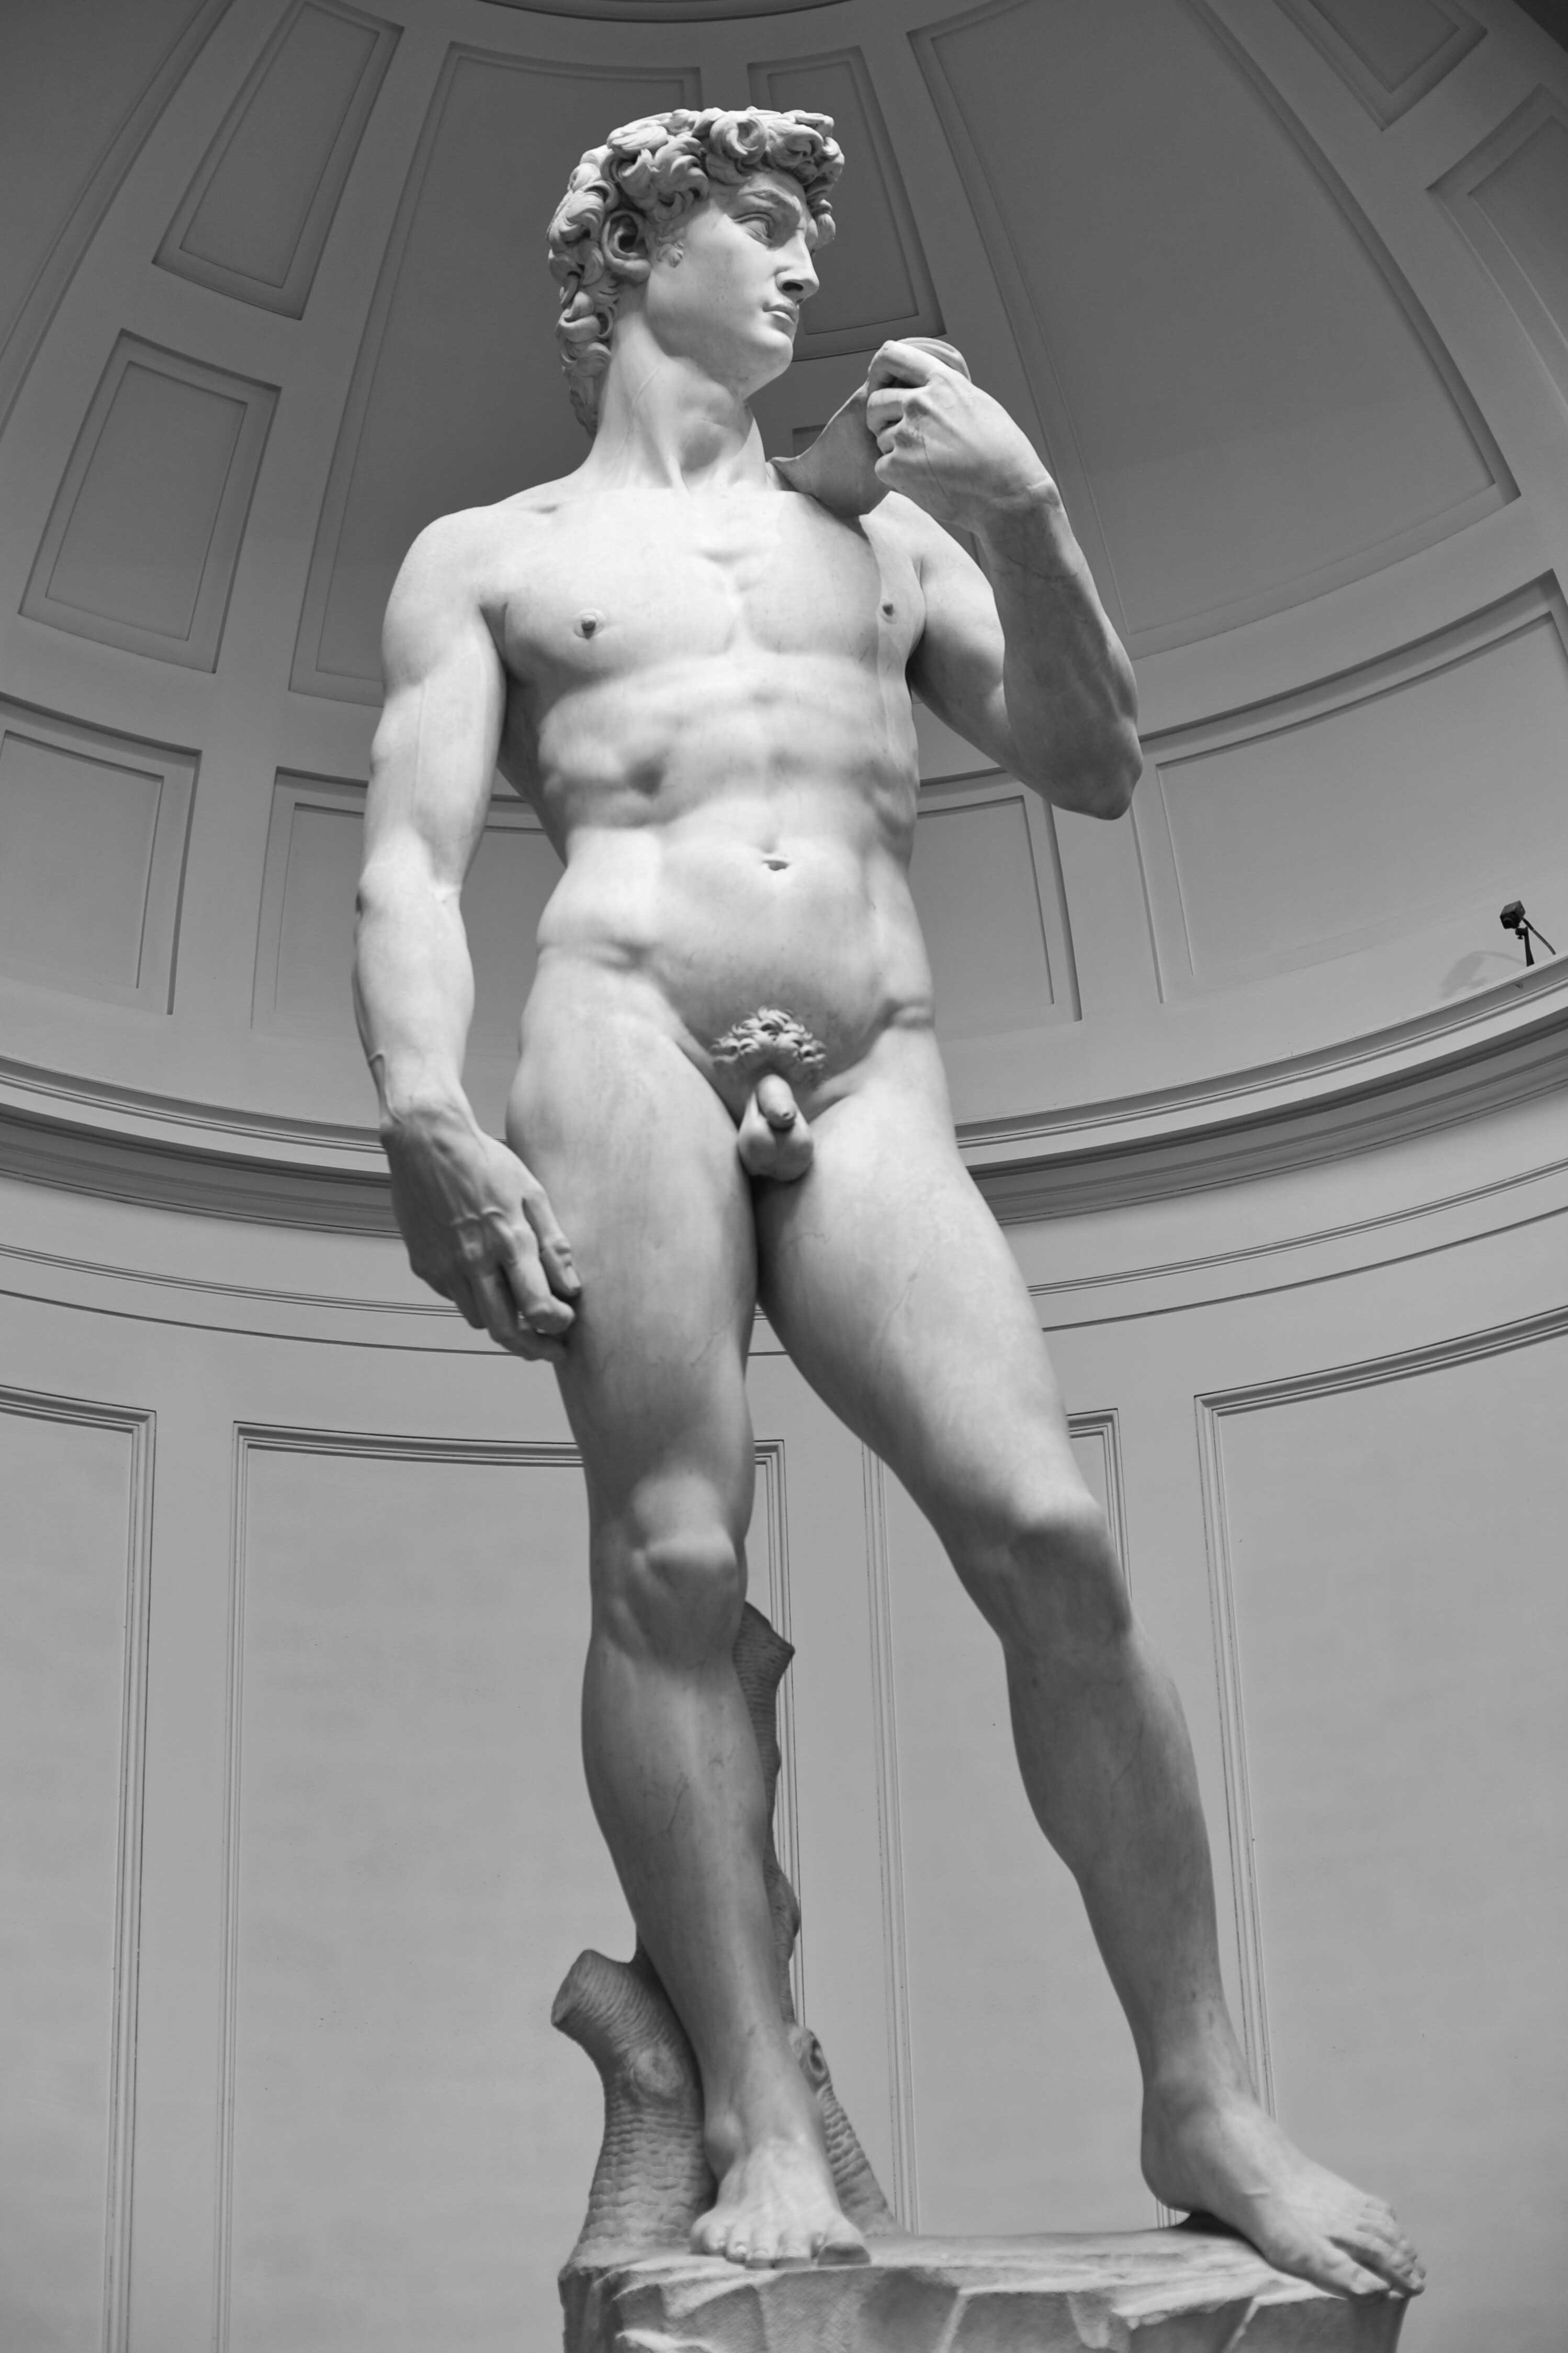 David by Michelangelo, Galleria dell'Accademia, Florence